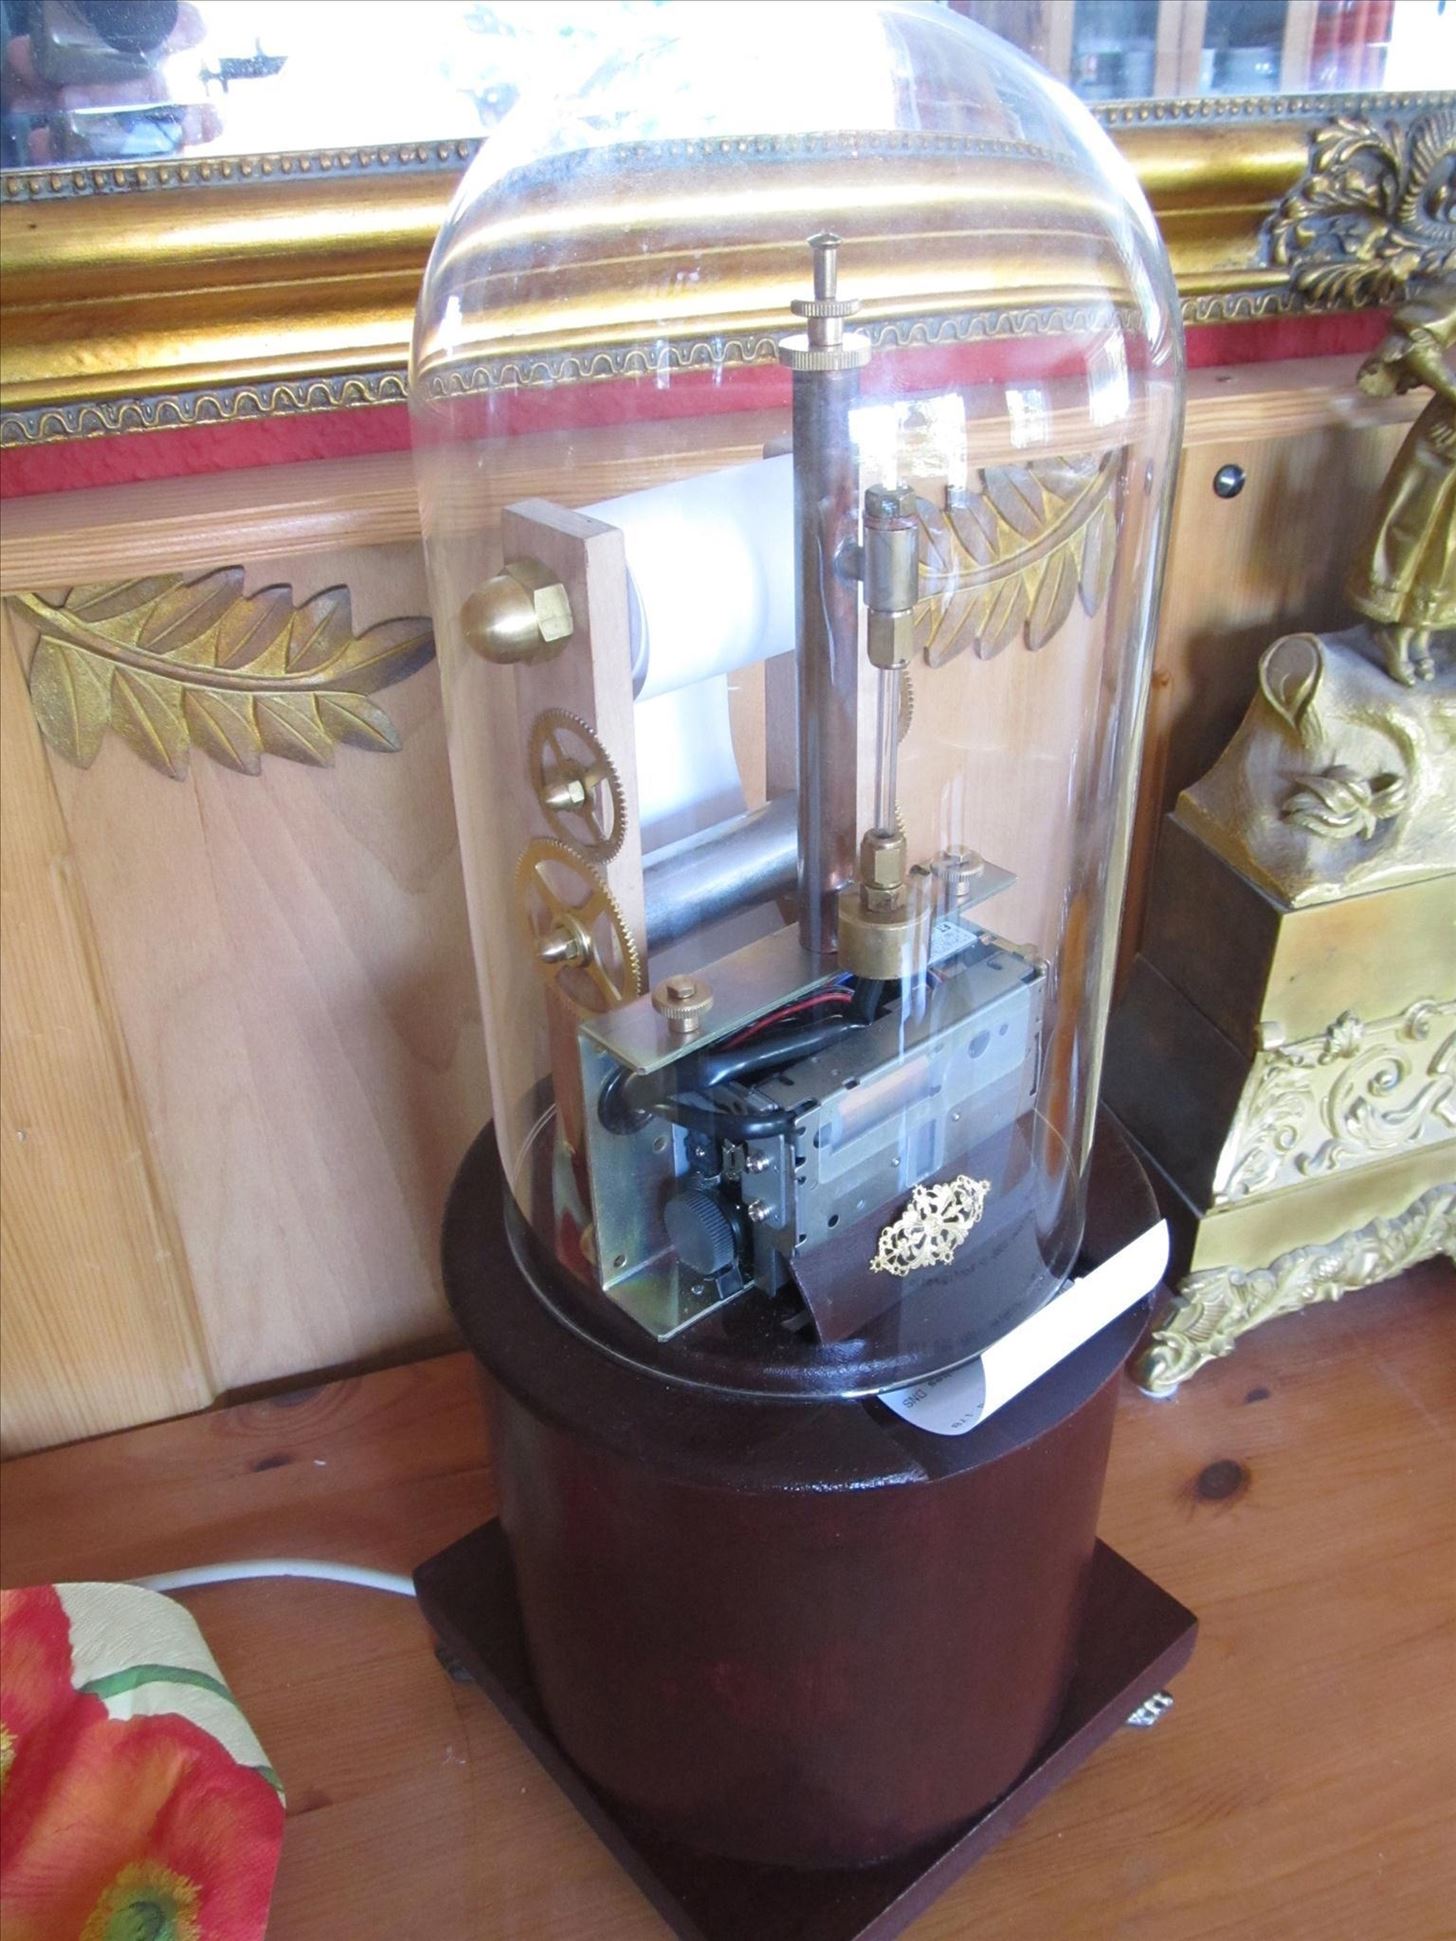 Print Your Emails in Style with This Steampunk Tape "Ticker Machine"